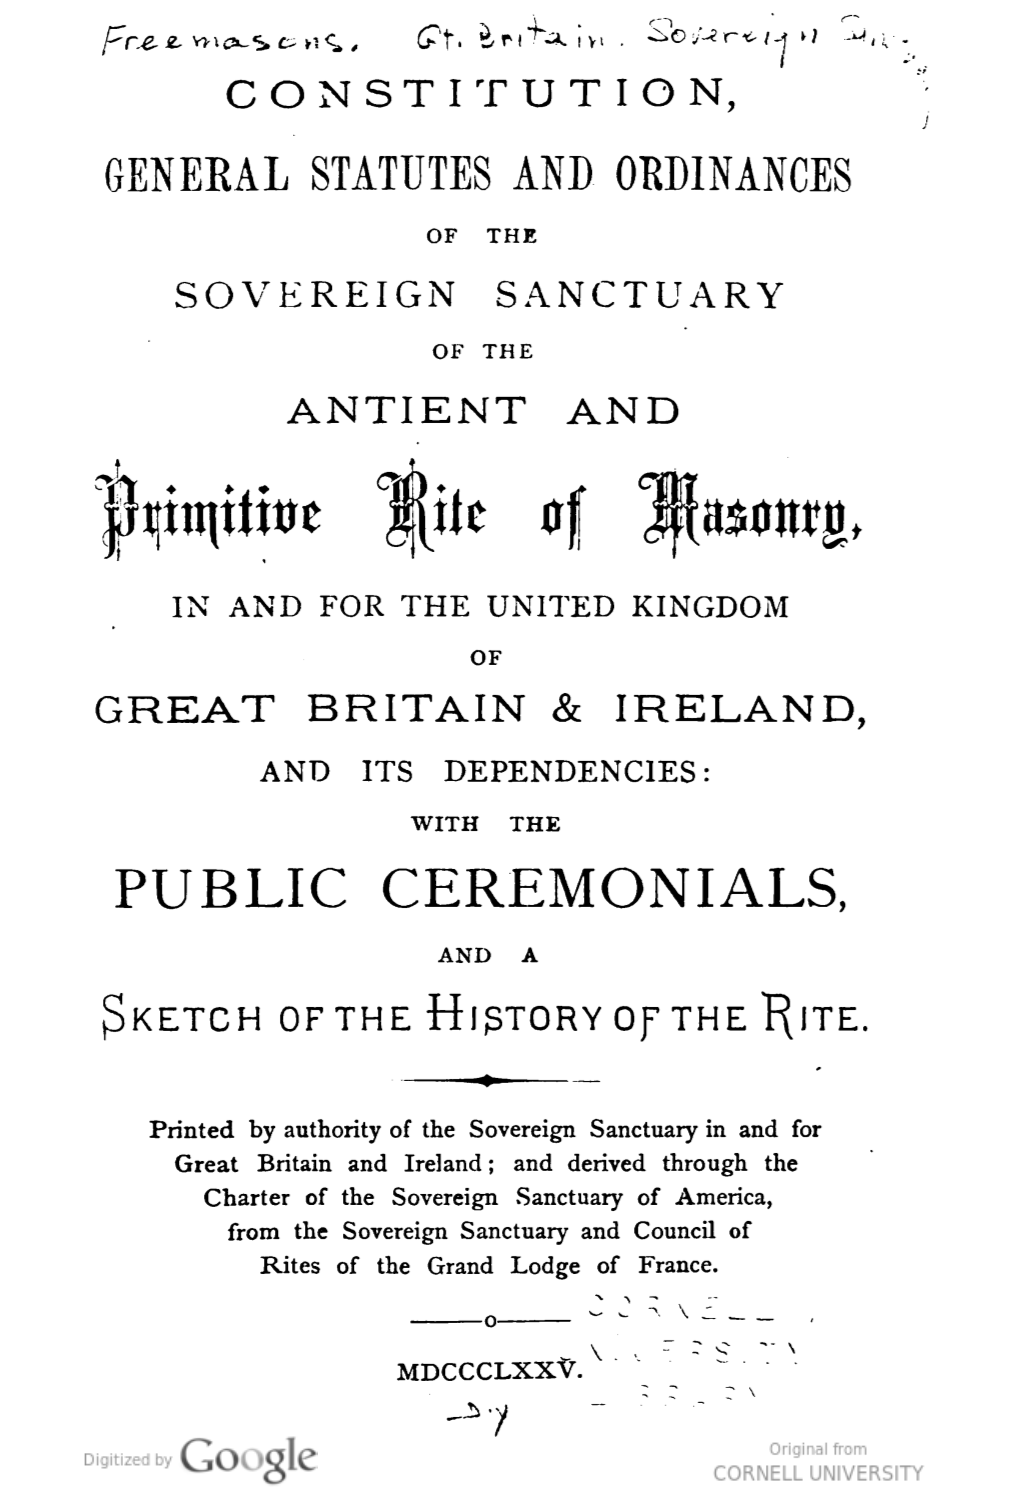 Constitution, General Statutes and Ordinances of the Sovereign